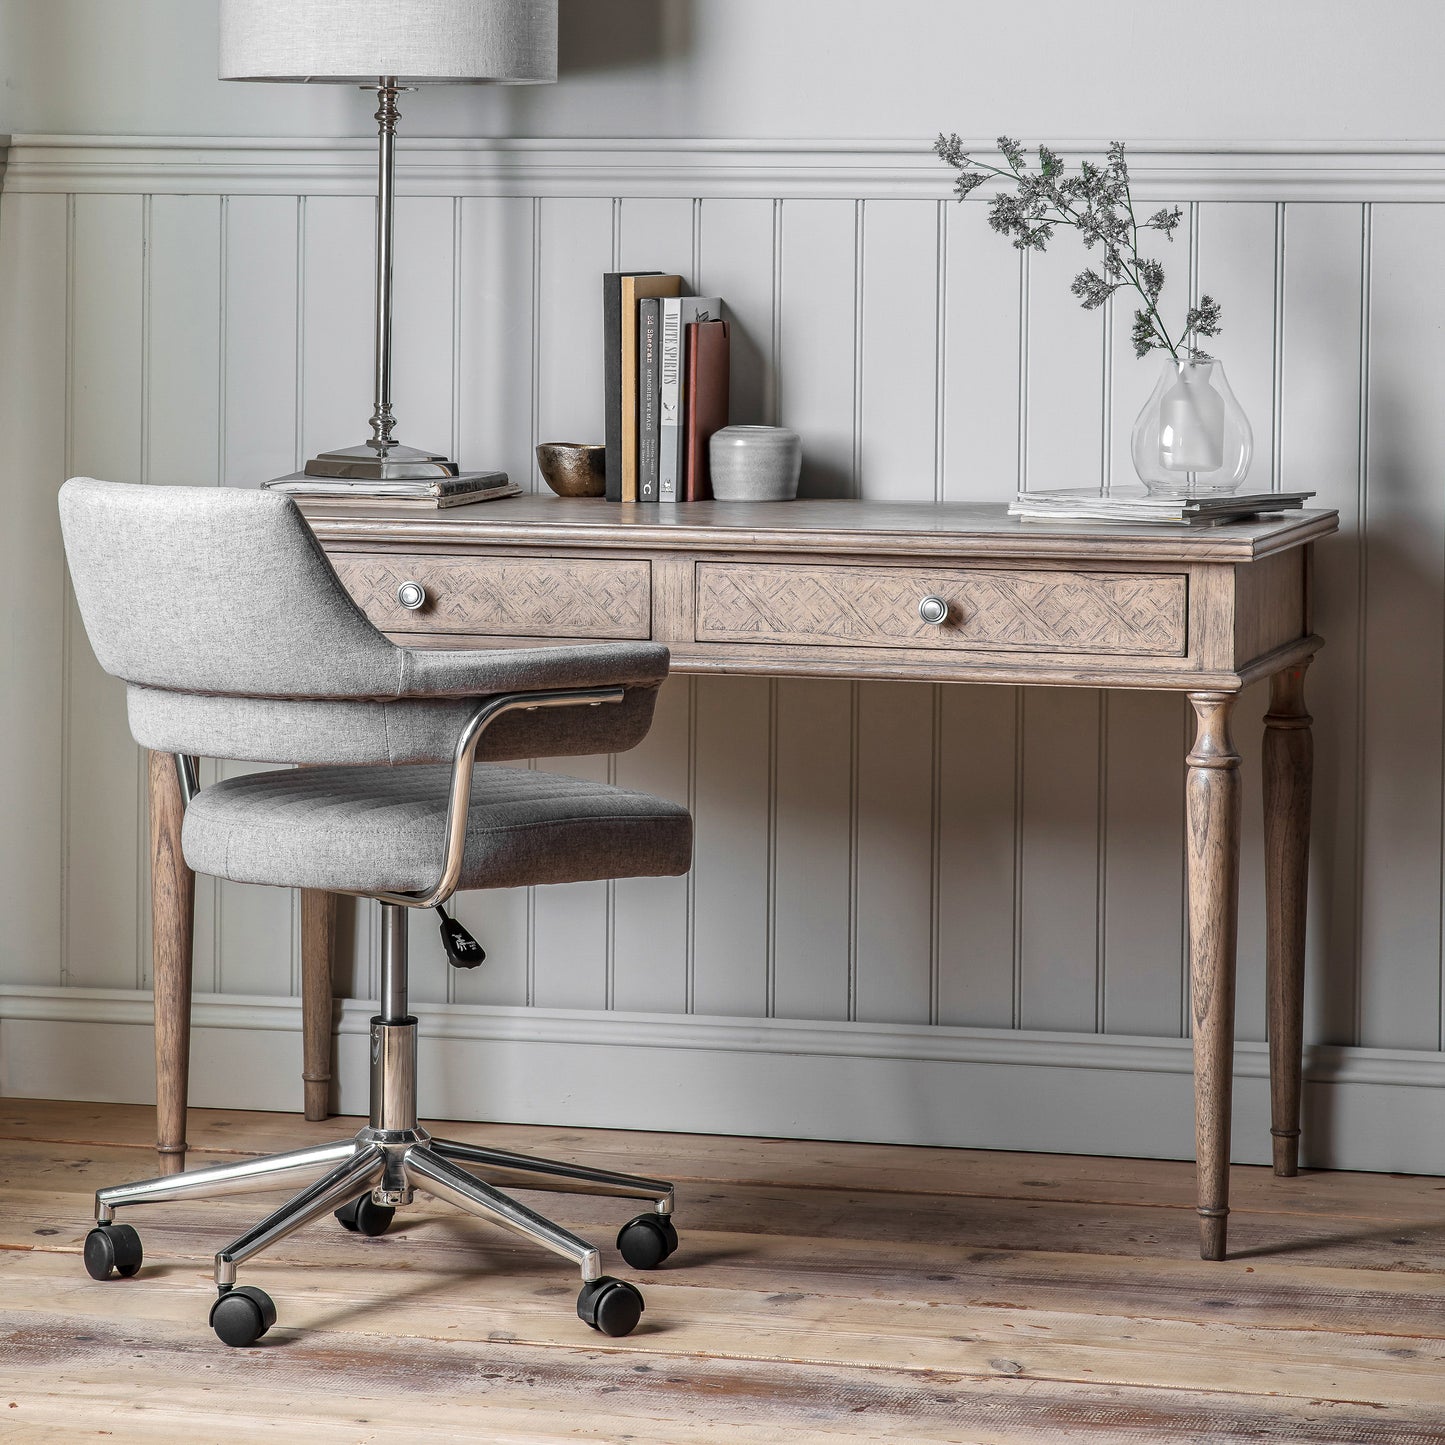 A Belsford 2 Drawer Desk 1300x600x780mm in an interior decor setting with a lamp and a chair.